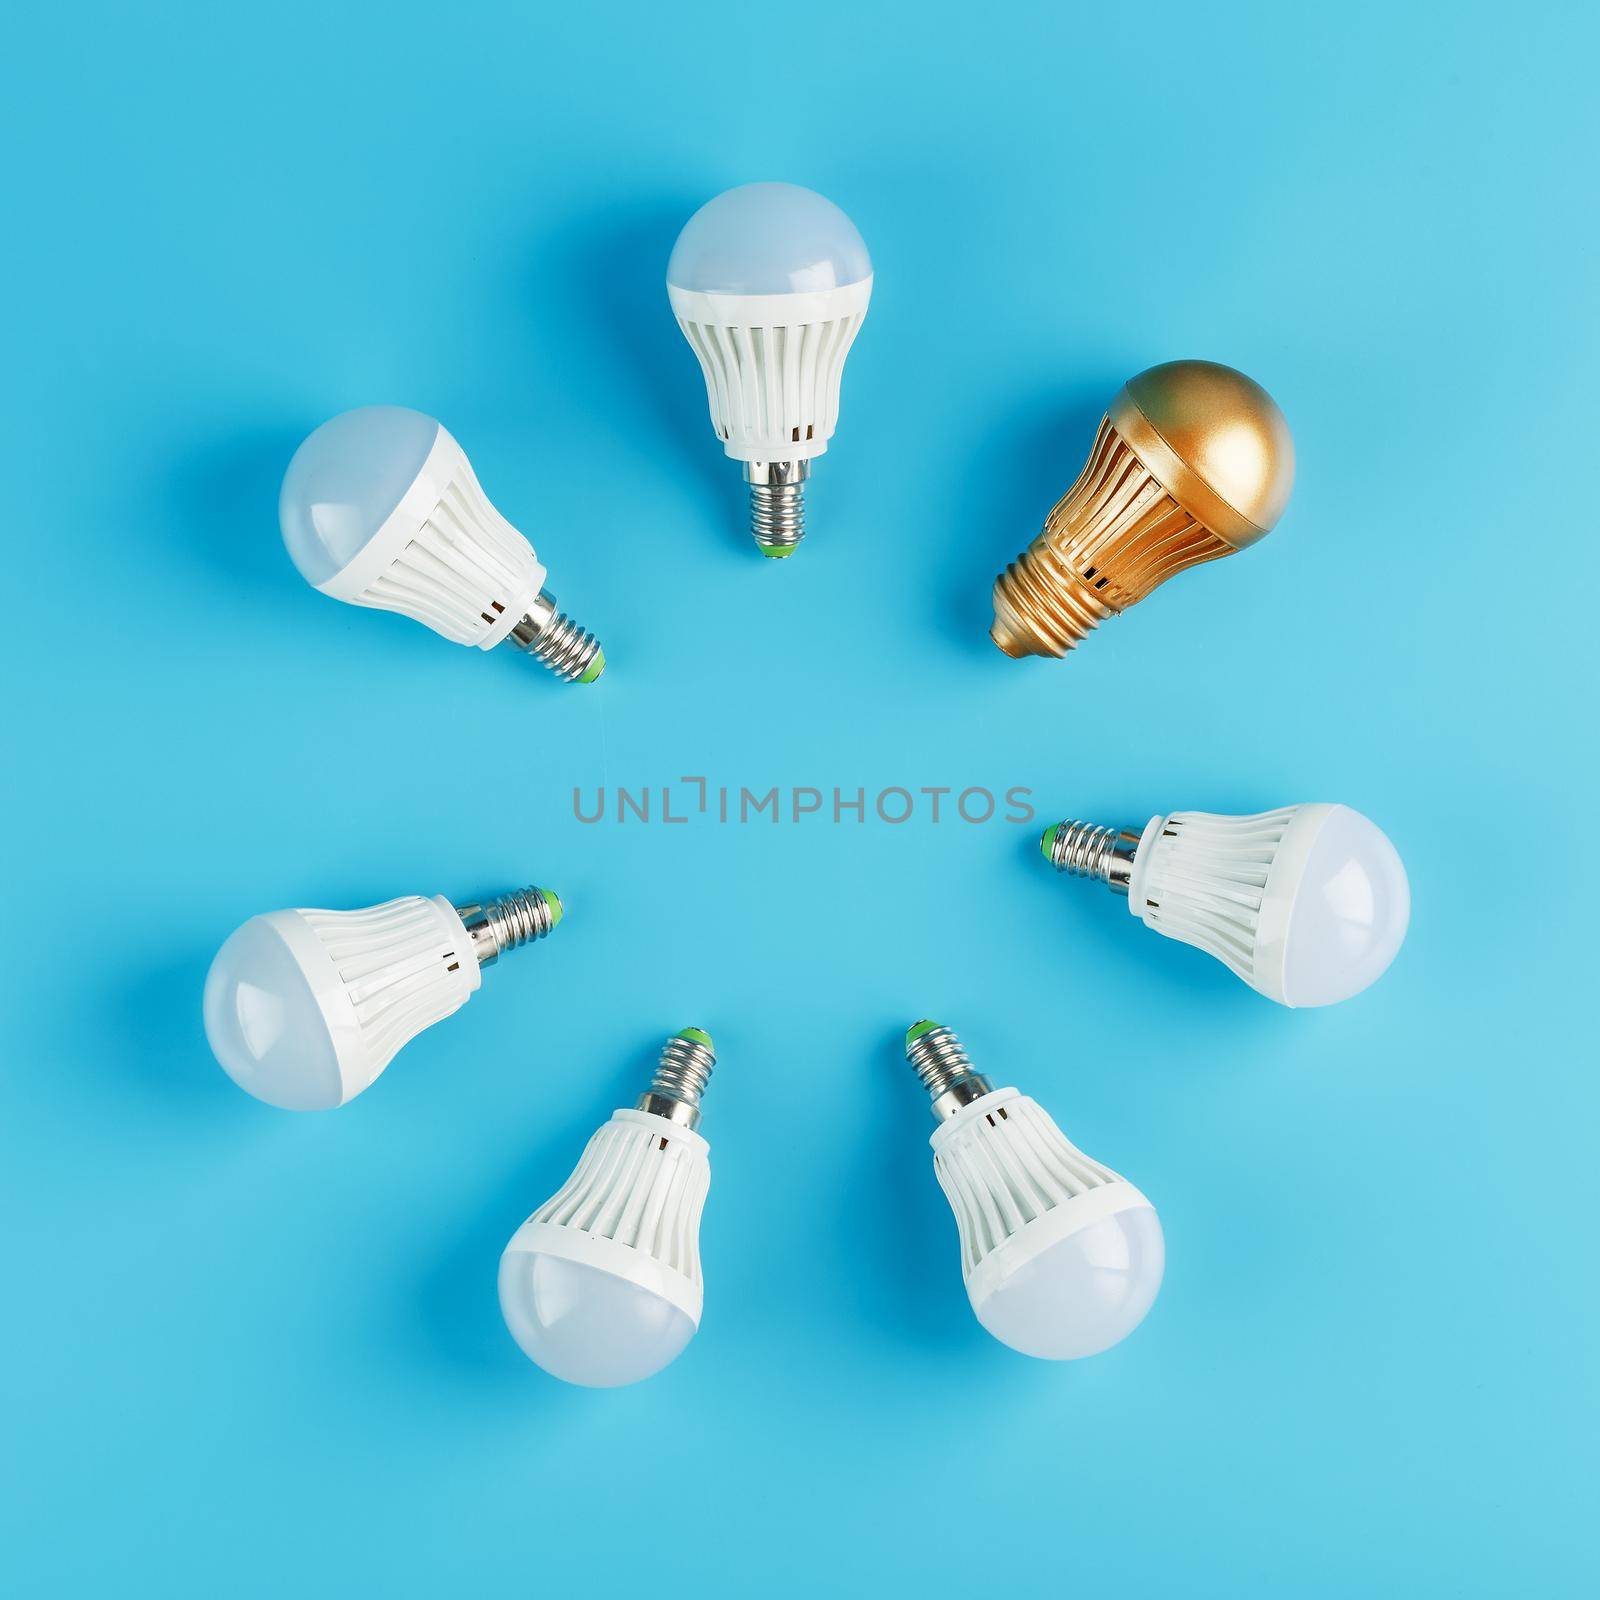 A Golden light bulb stands out in the circle of light bulbs of a ring of white lamps on a blue background. One original idea out of many is mediocre. Concept features, one in a crowd.